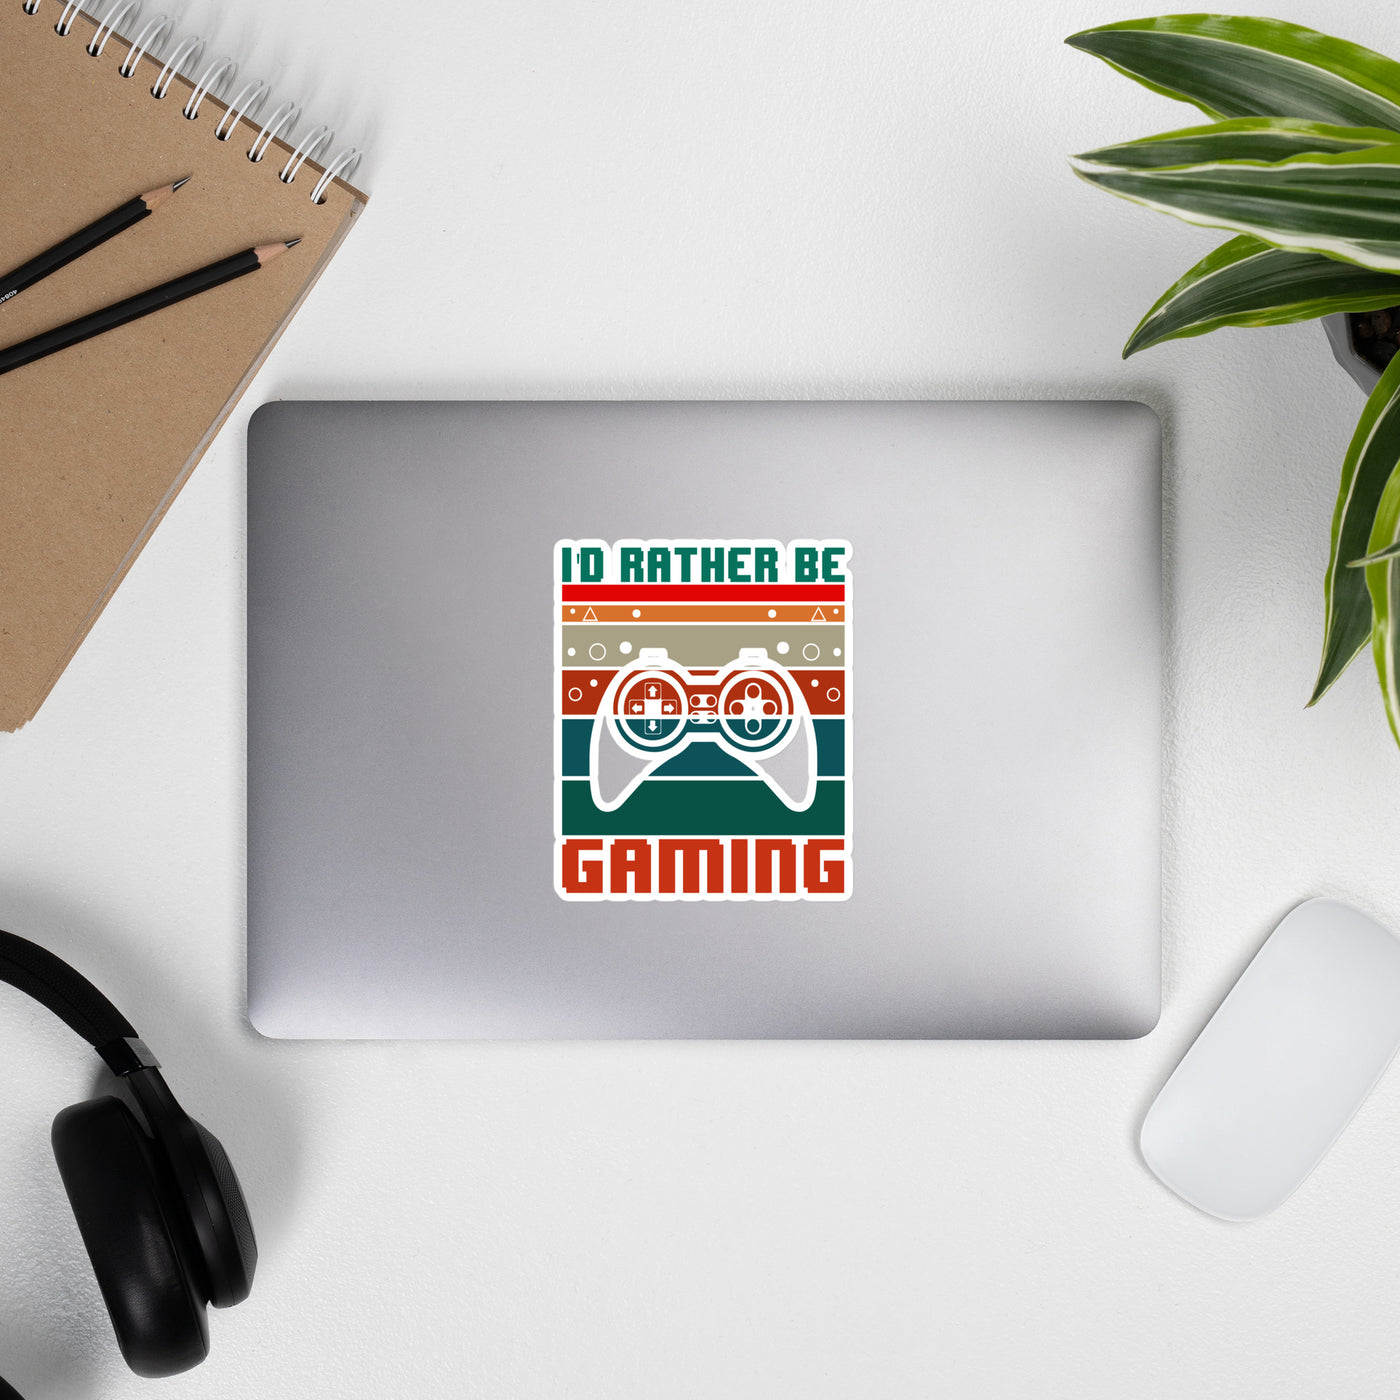 I'd rather be Gaming - Bubble-free stickers